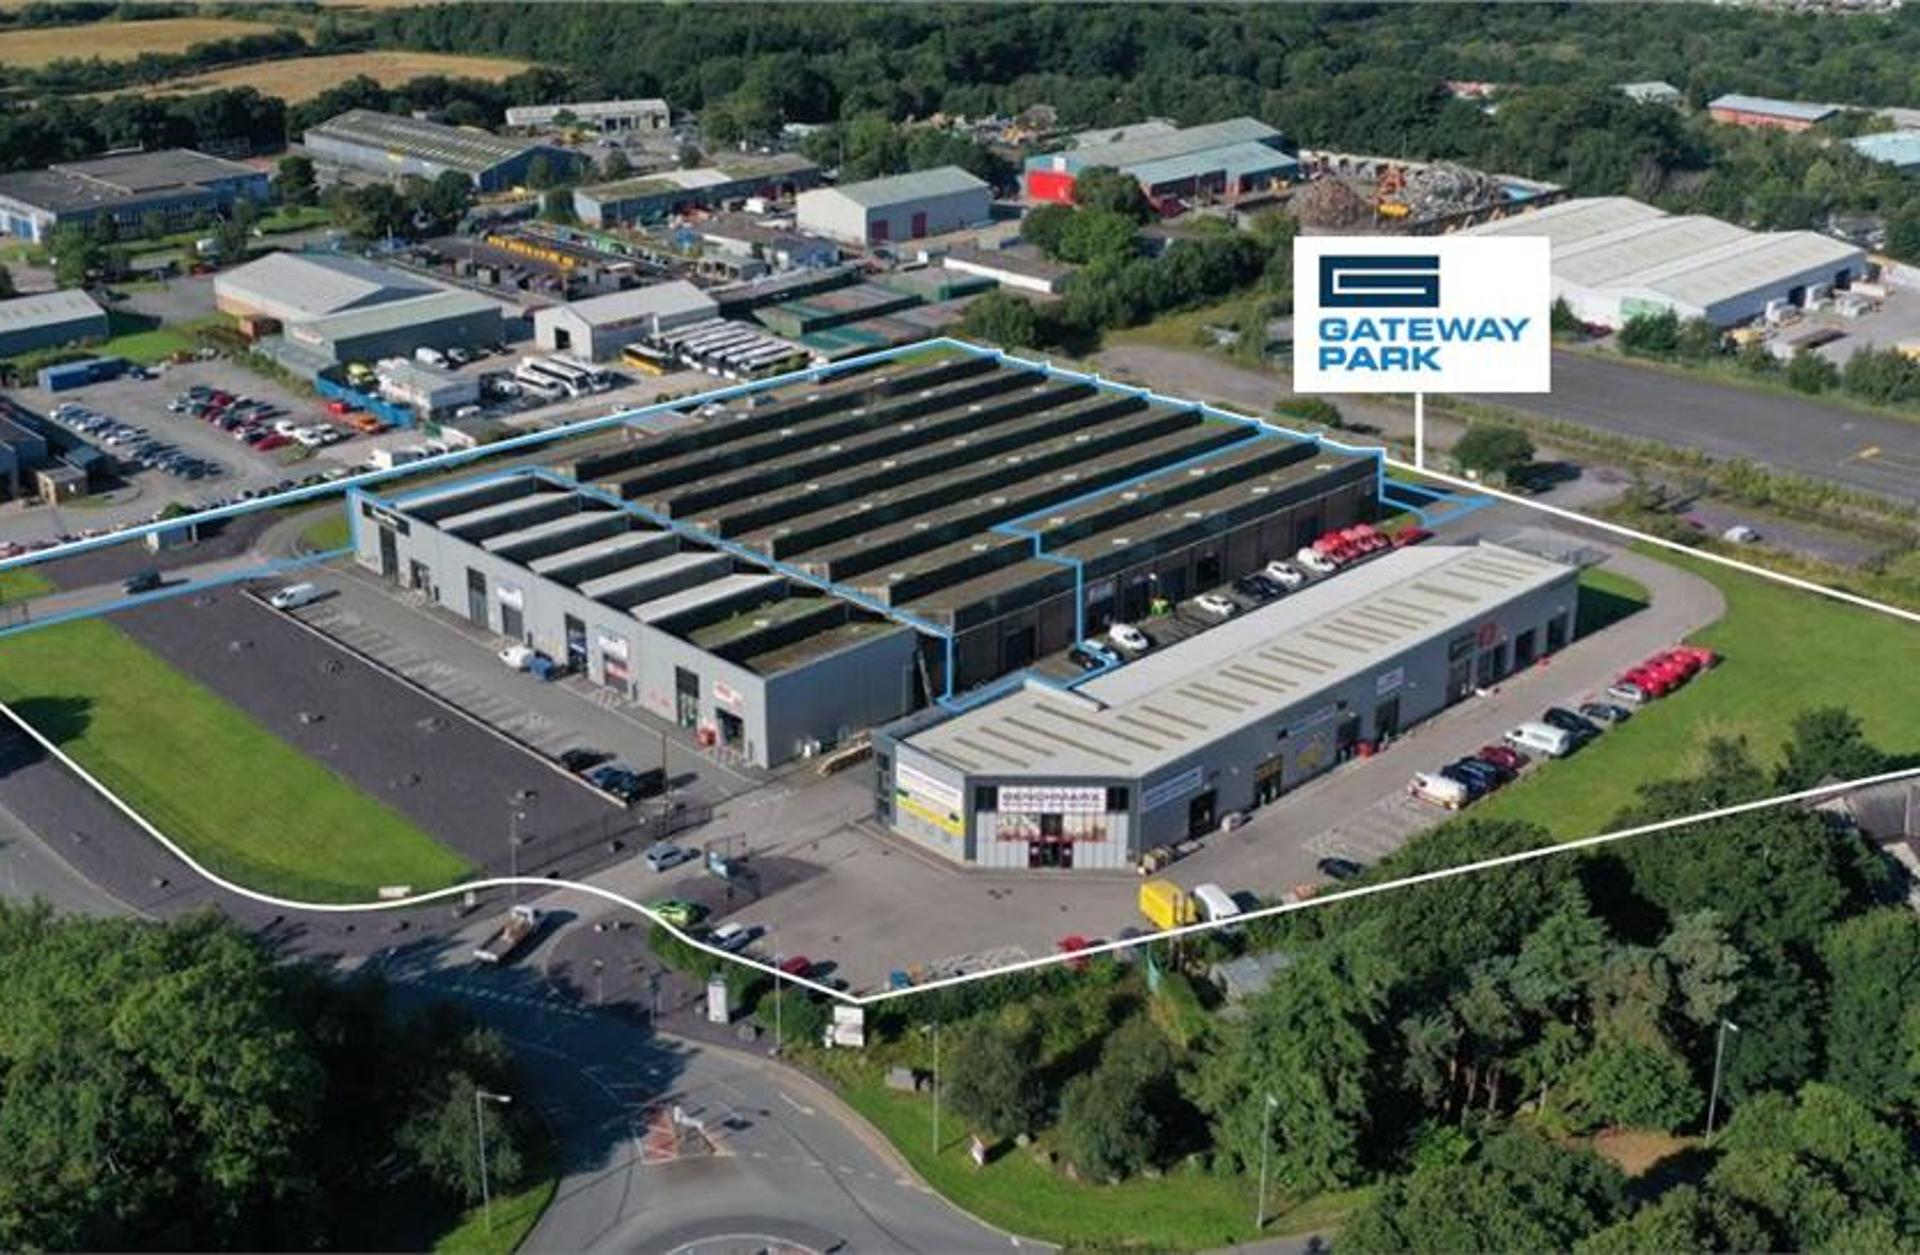 52.7k sq ft warehouse in Bangor up for sale in &pound;2.86m auction